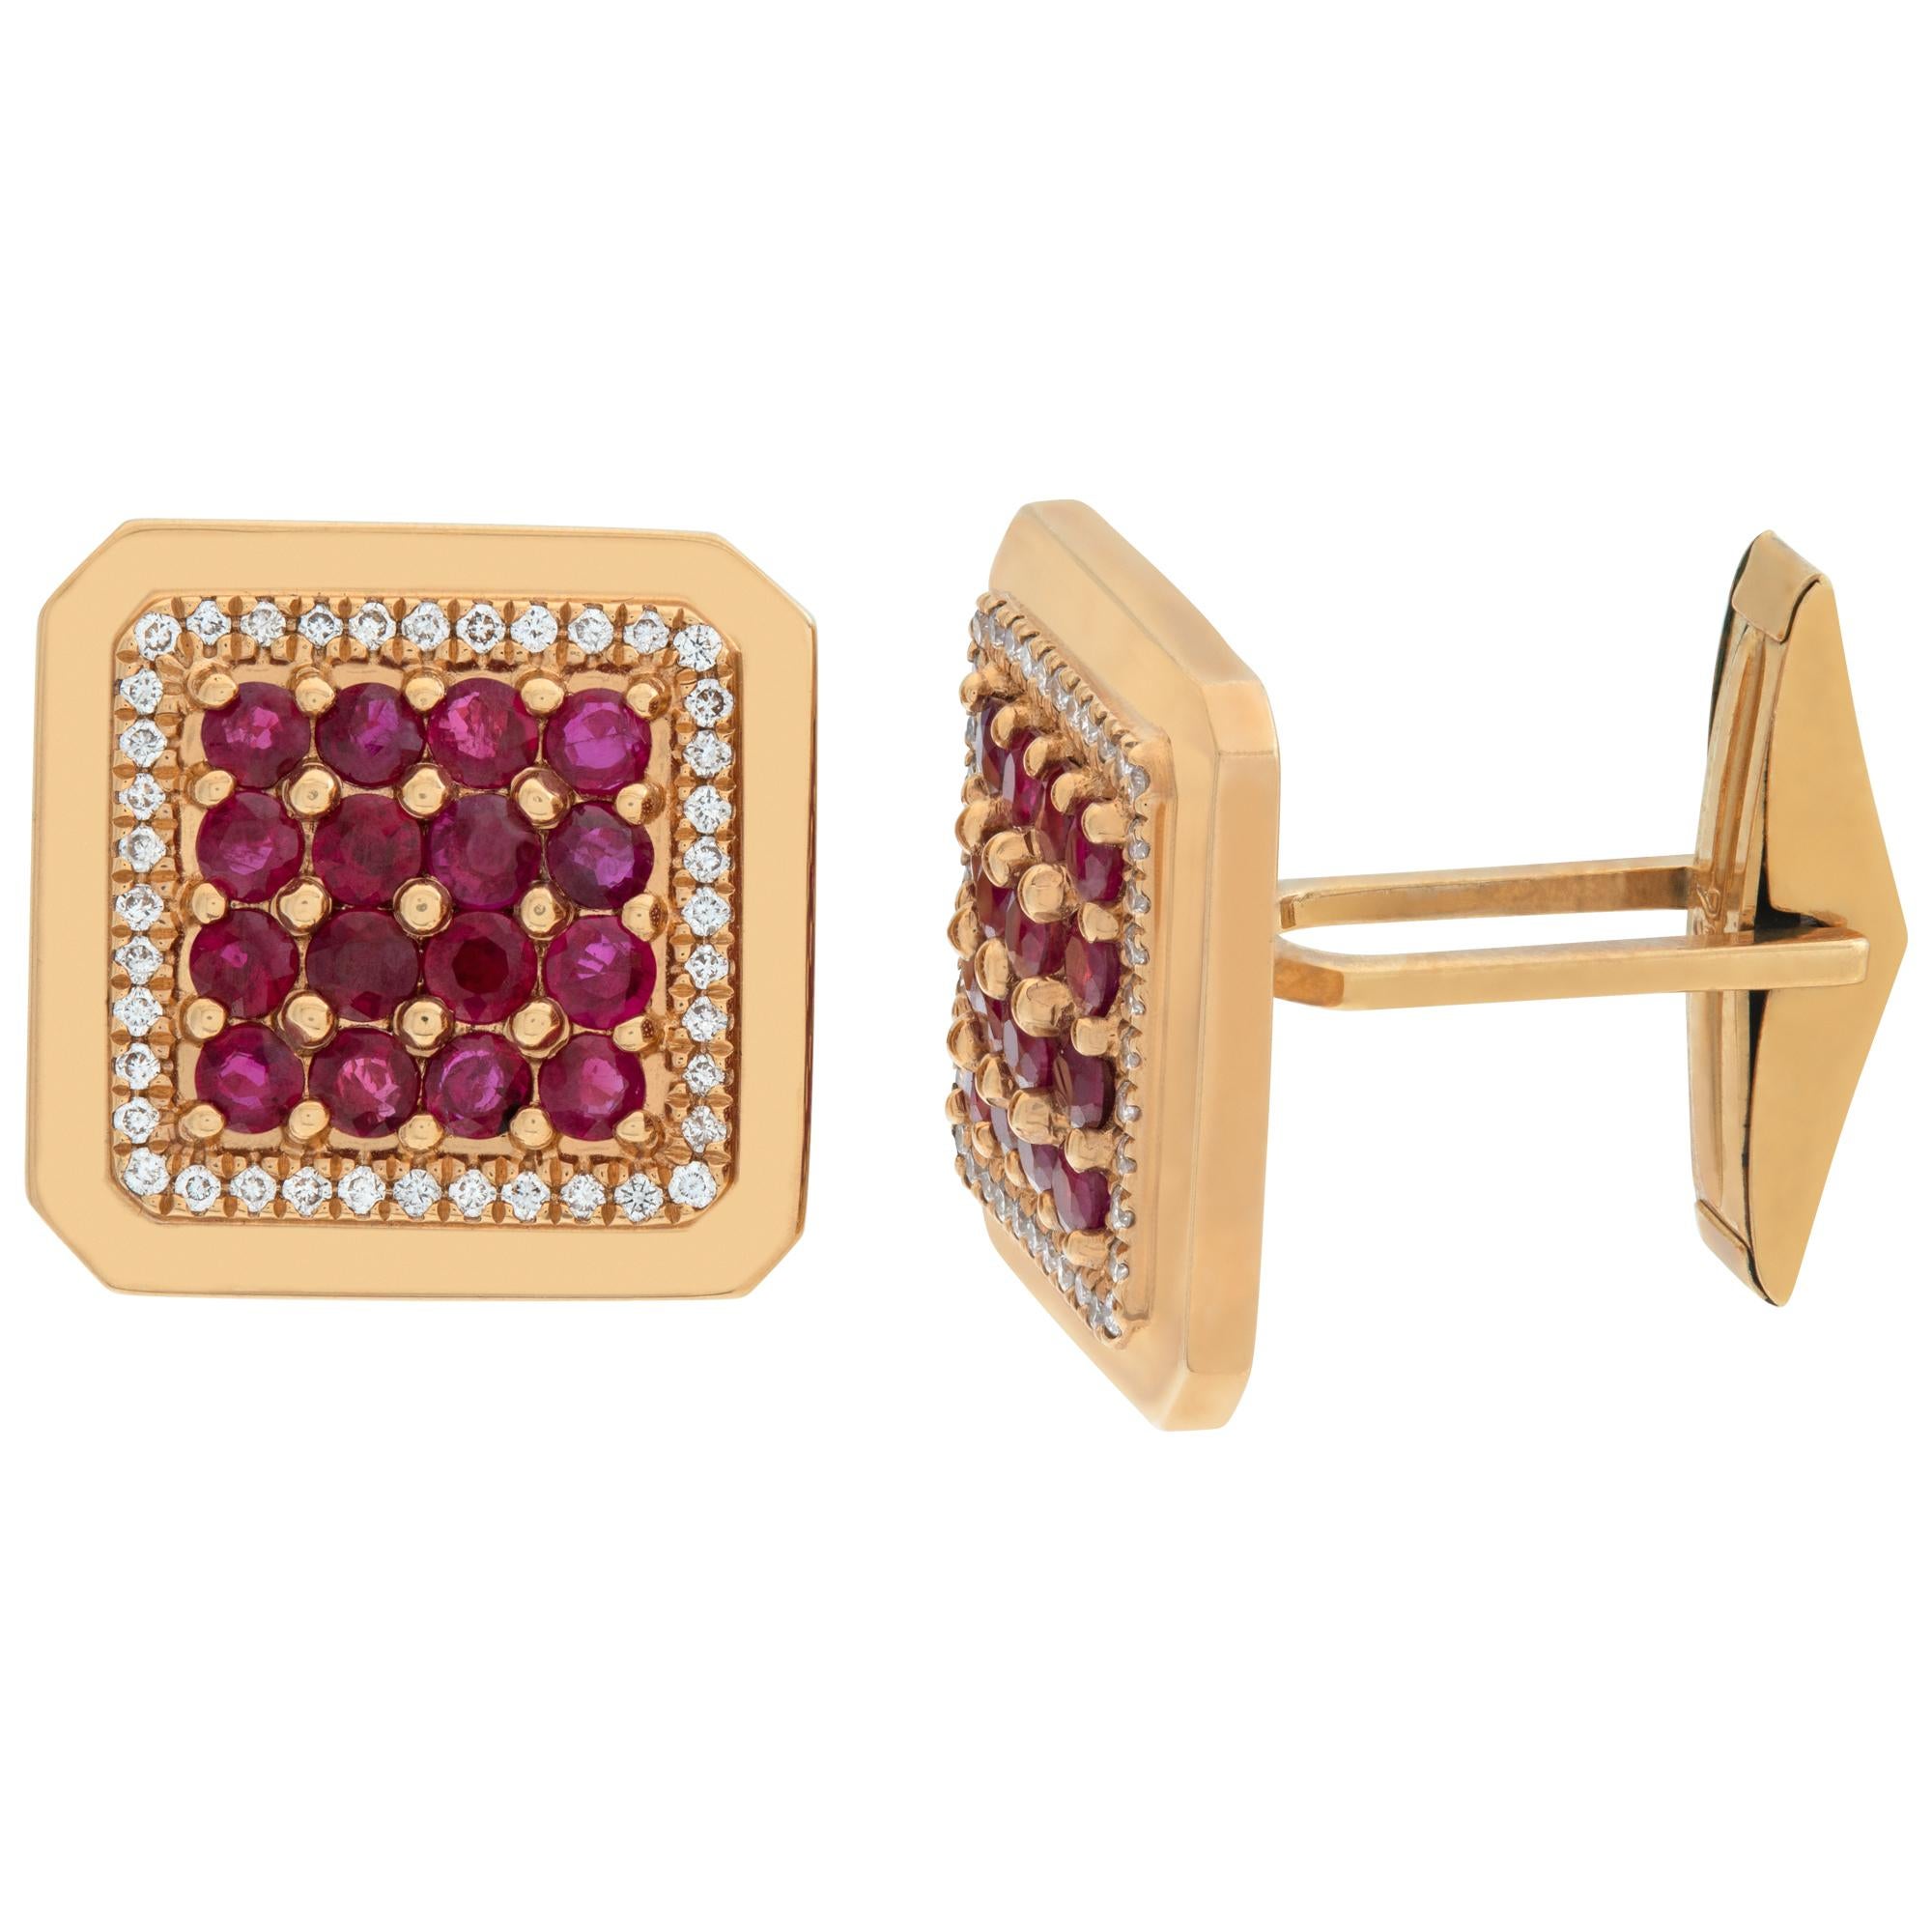 Ruby & 3.20 Carat Diamond 18k Yellow Gold Square Cufflinks In Excellent Condition For Sale In Surfside, FL